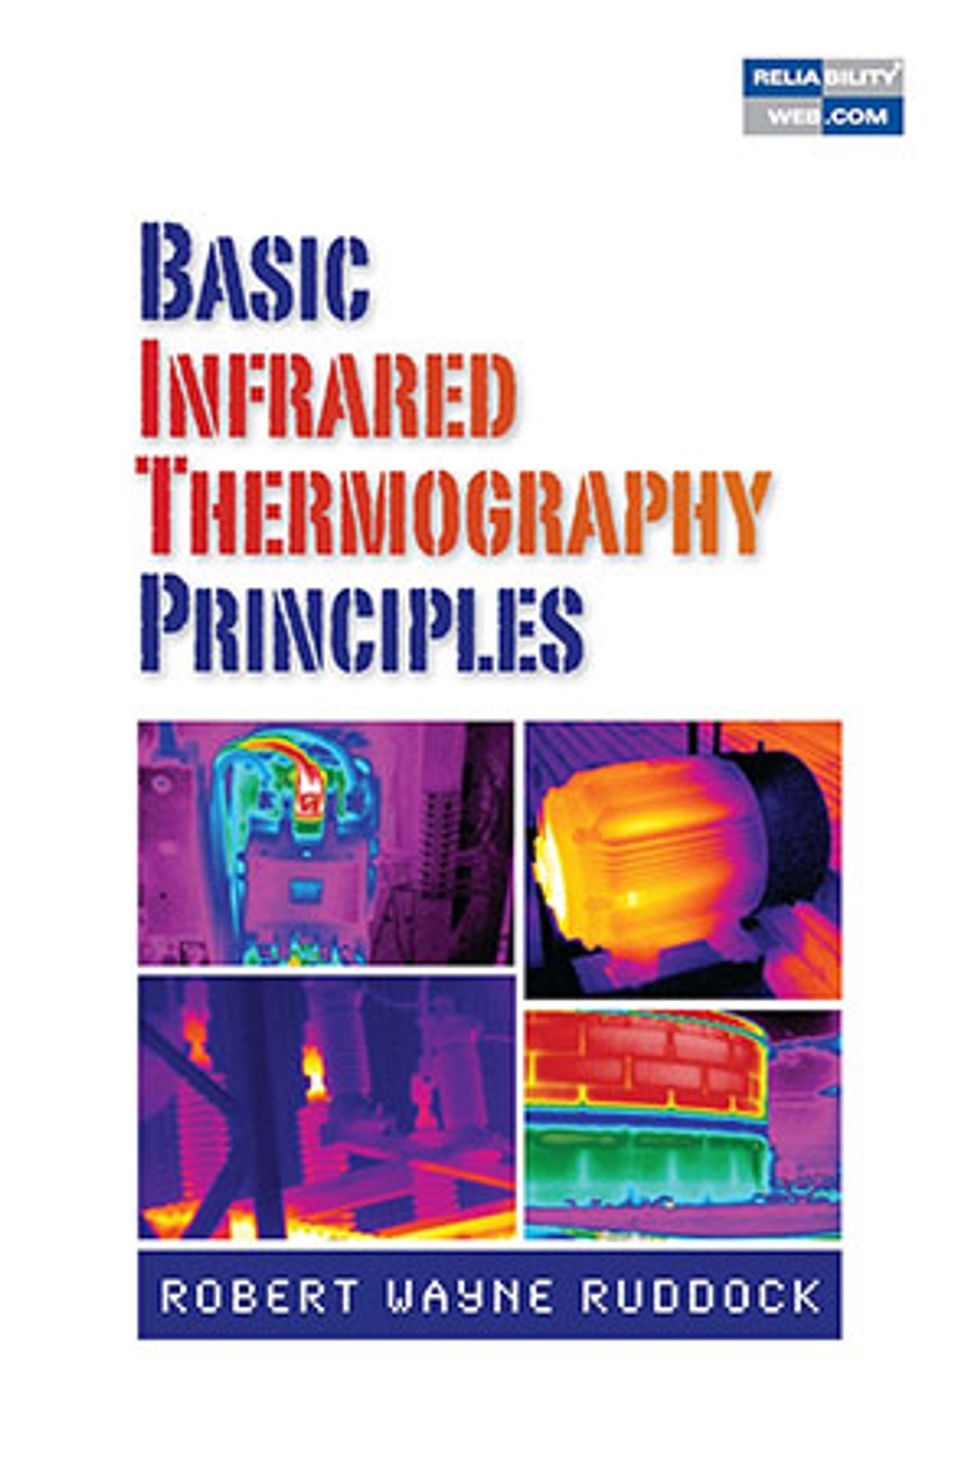  Basic Infrared Thermography Principles 